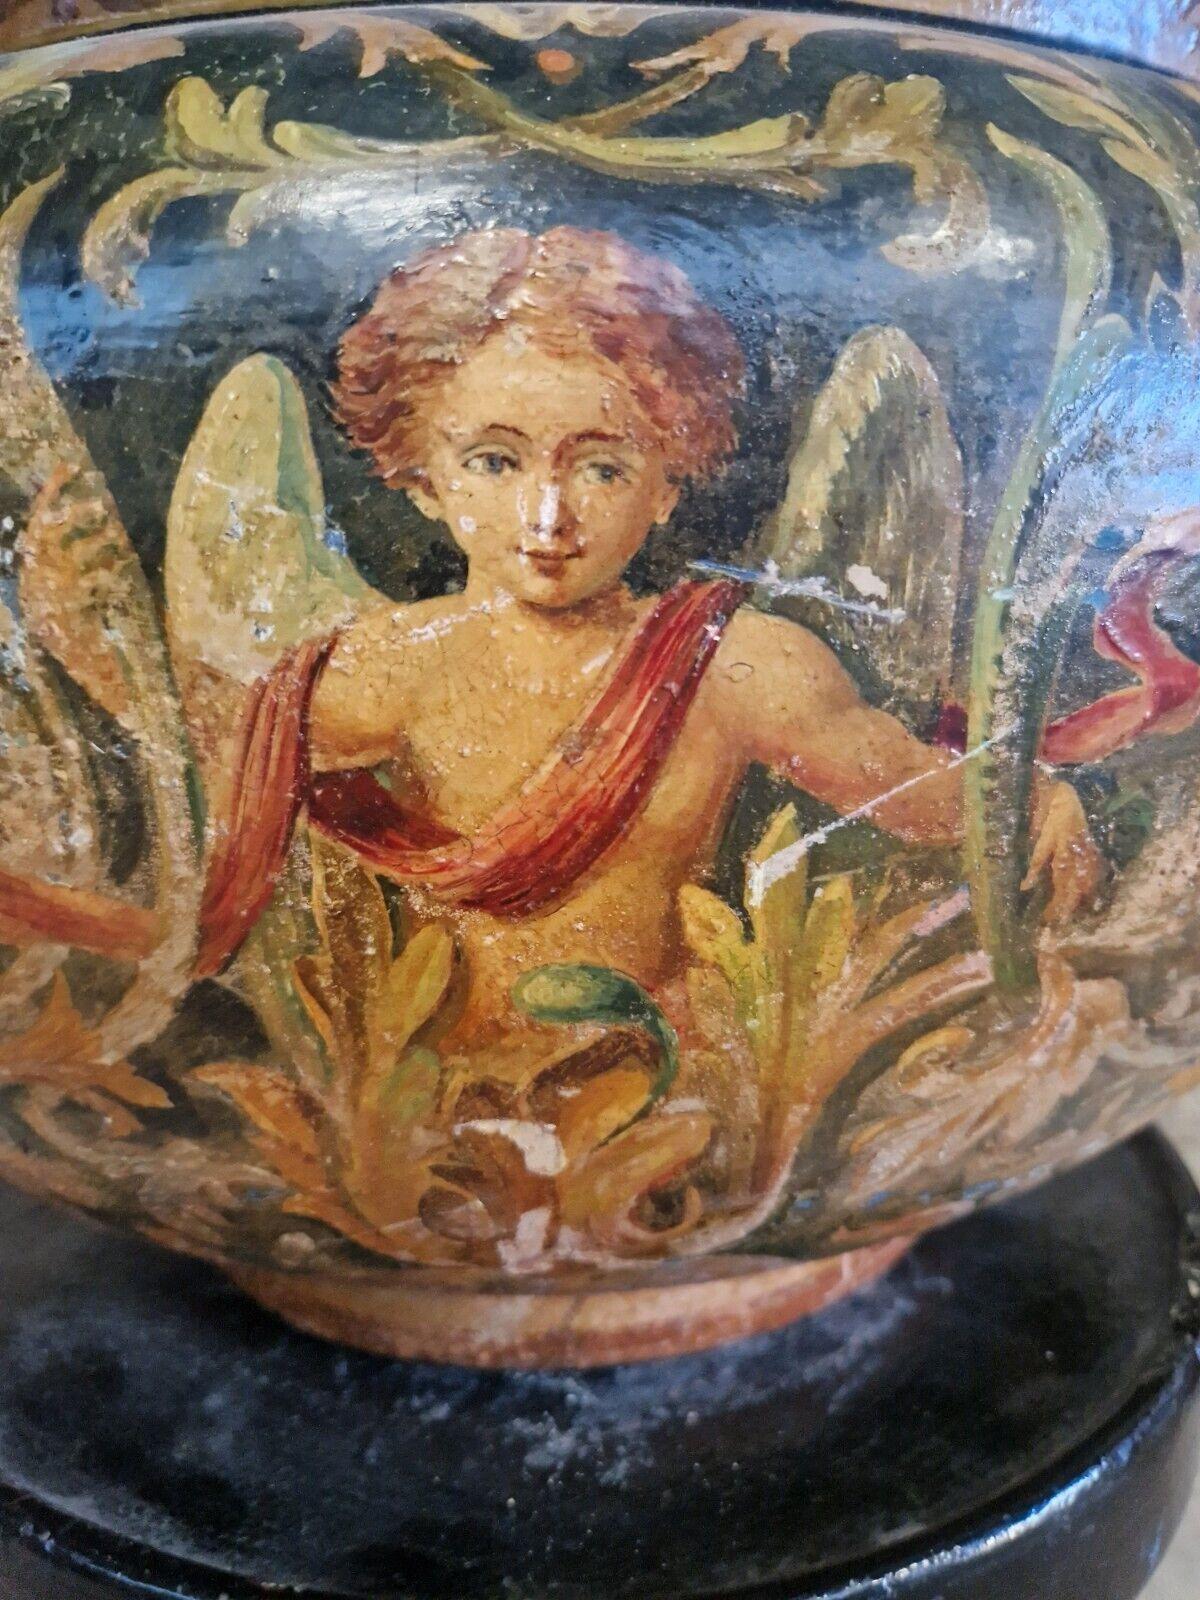 Add a touch of Victorian charm to your home with this exquisite antique French Majolica jardinière pot and plinth from the 19th century. The beautifully crafted ceramic pot features a stunning multicolored design of grotesques and cherubs, perfect